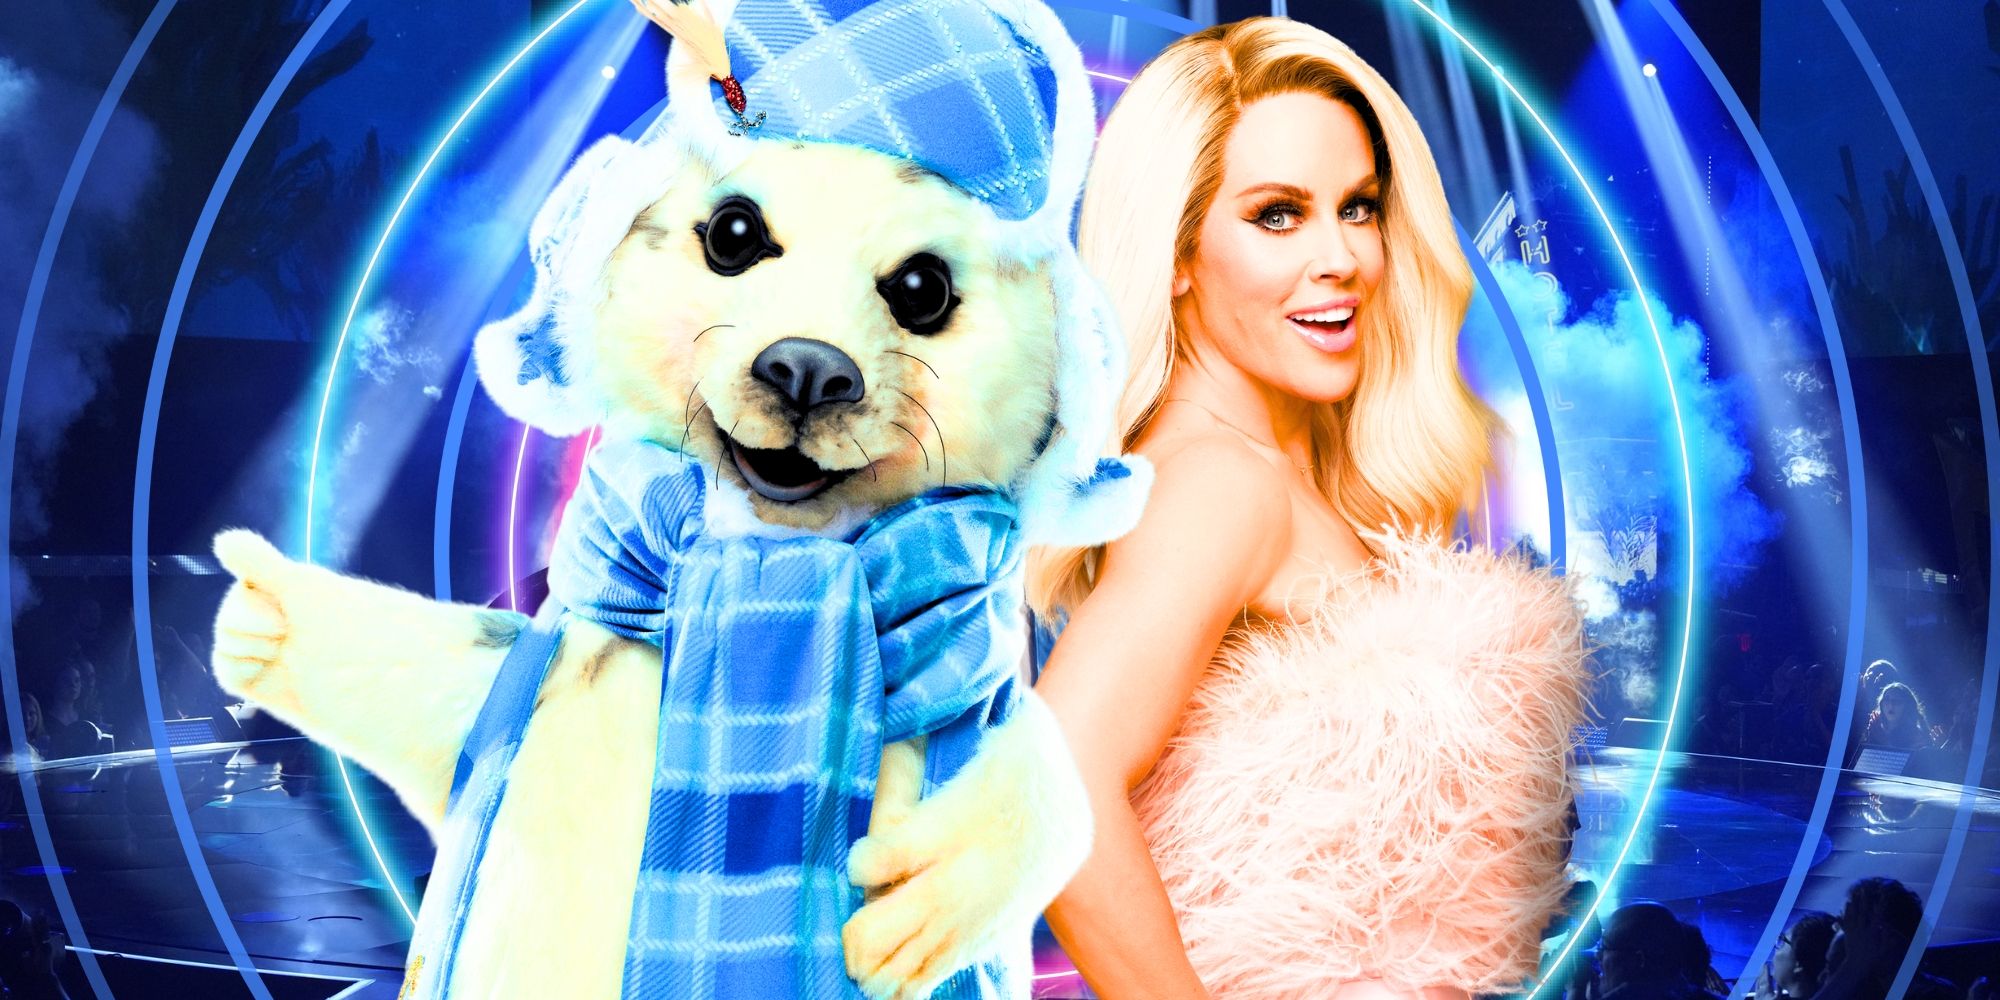 The Masked Singer’s Seal and Jenny McCarthy posing for the camera